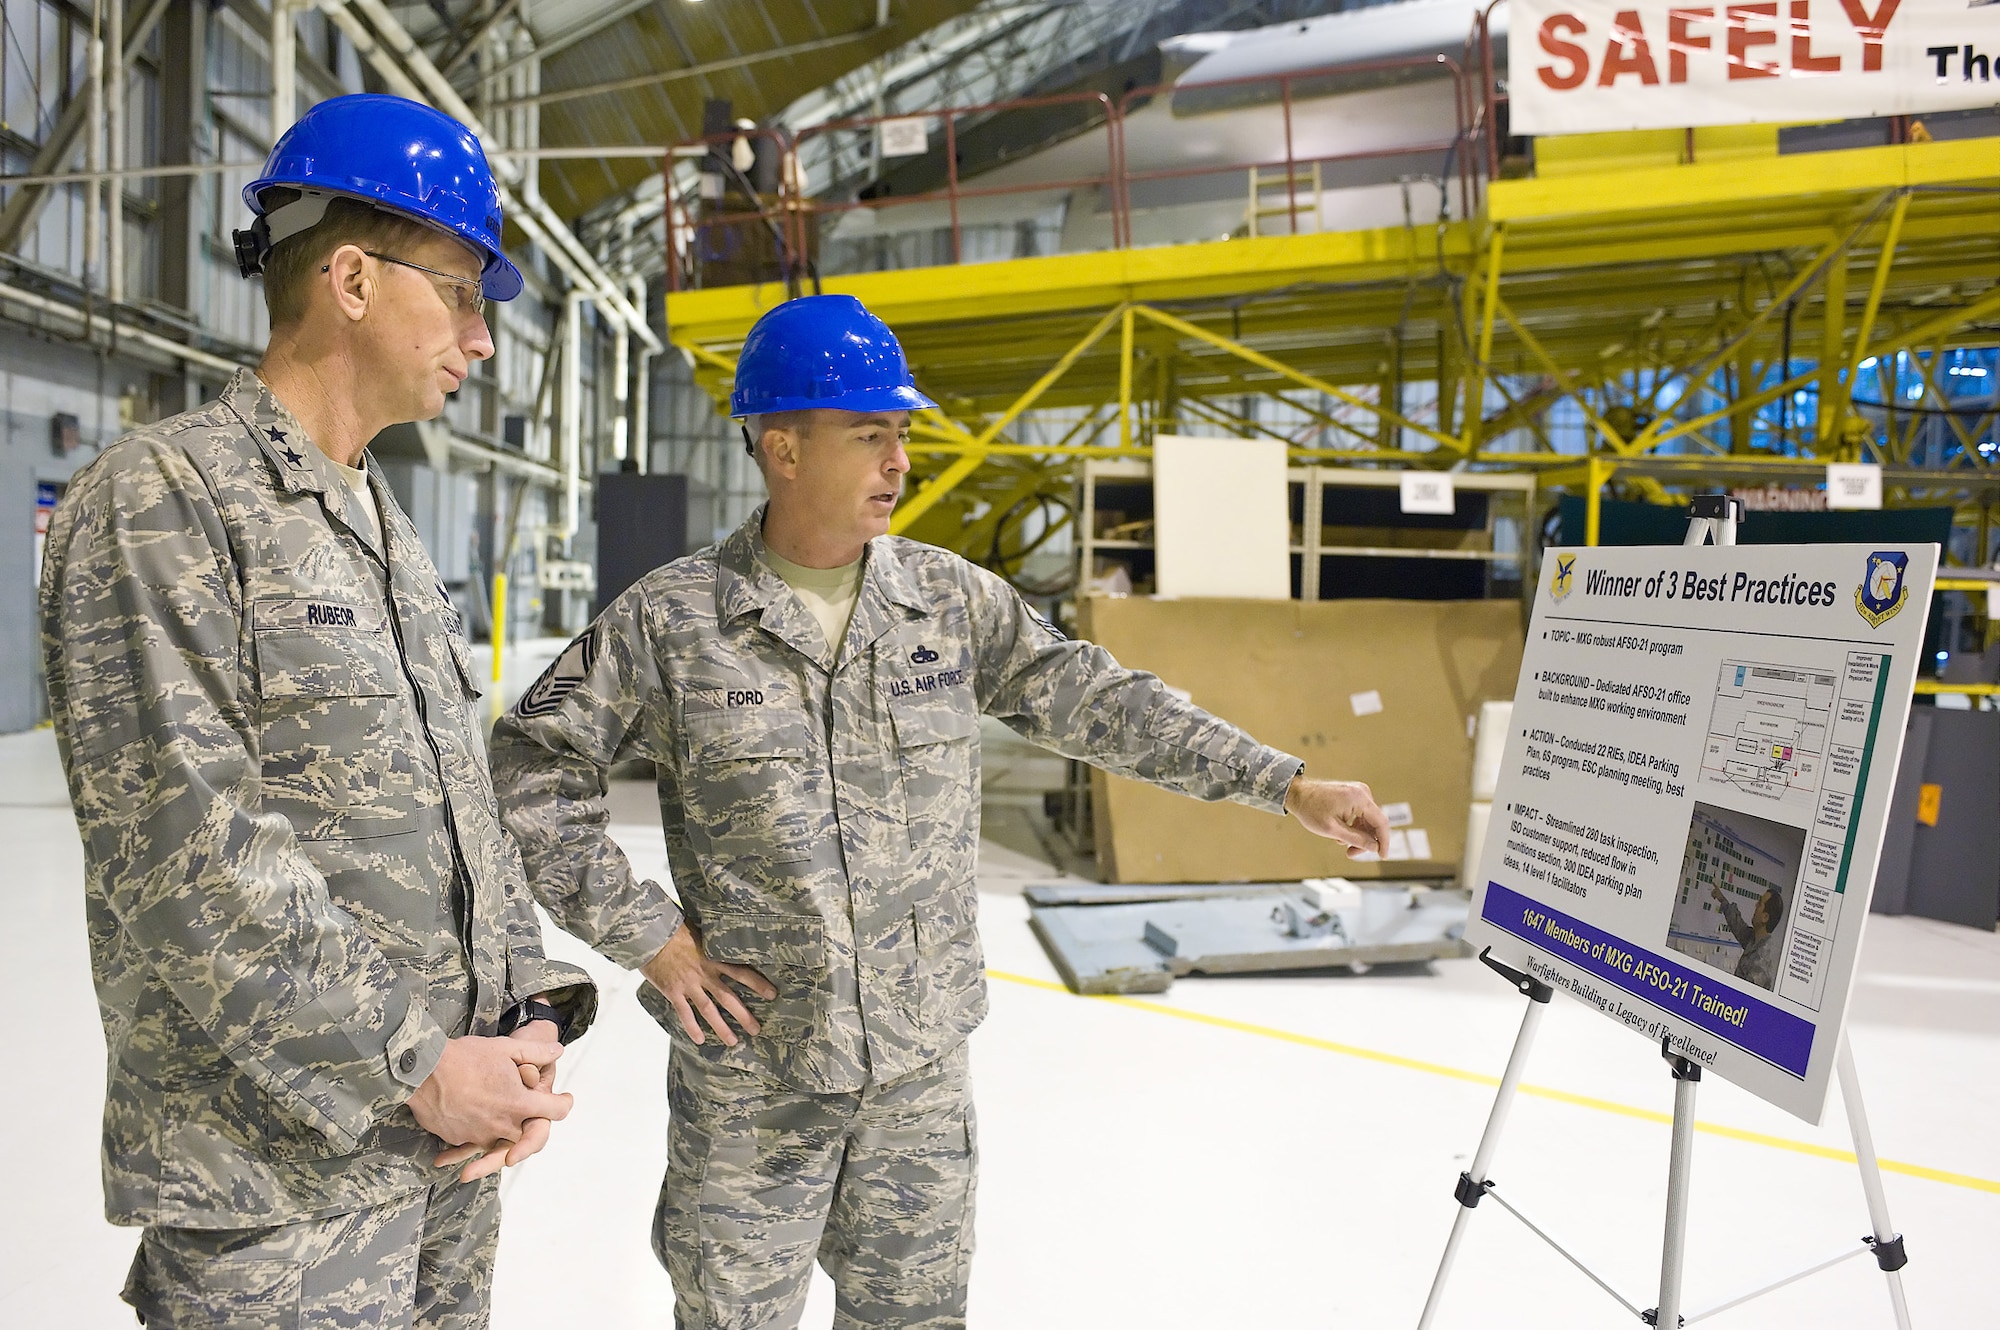 Senior Master Sgt. Bryan Ford, 512th Maintenance Squadron, briefs Maj. Gen. James T. Rubeor, 22nd Air Force commander, on Air Force Smart Operations for the 21st Century processes in the 512th Maintenance Group. AFSO 21 is designed to maximize value and minimize waste. General Rubeor visited several maintenance areas during his visit to the 512th Airlift Wing Nov. 5-8.